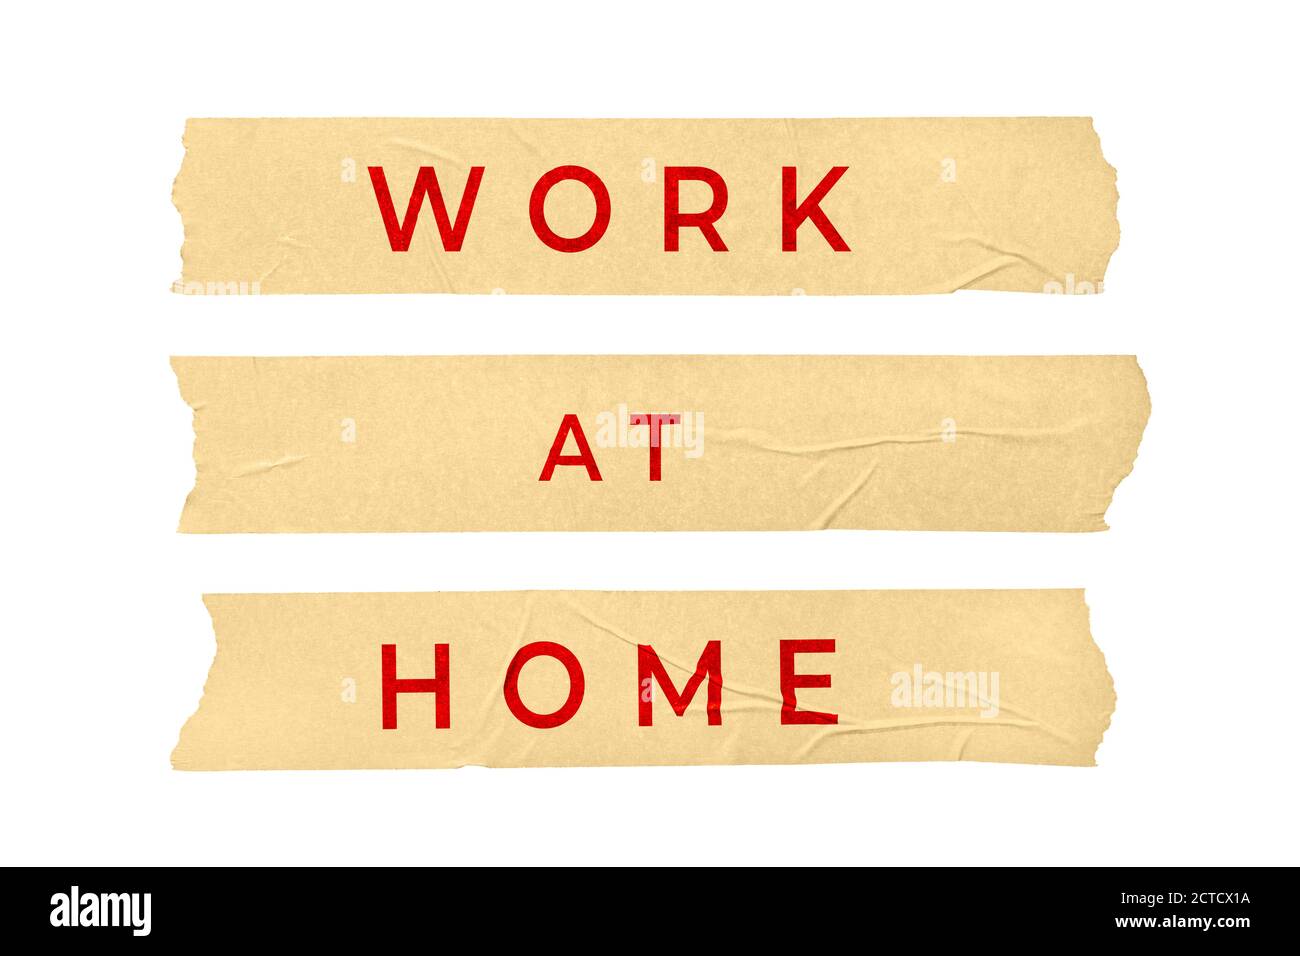 Work at home concept. Tape stickers with text isolated on white background Stock Photo